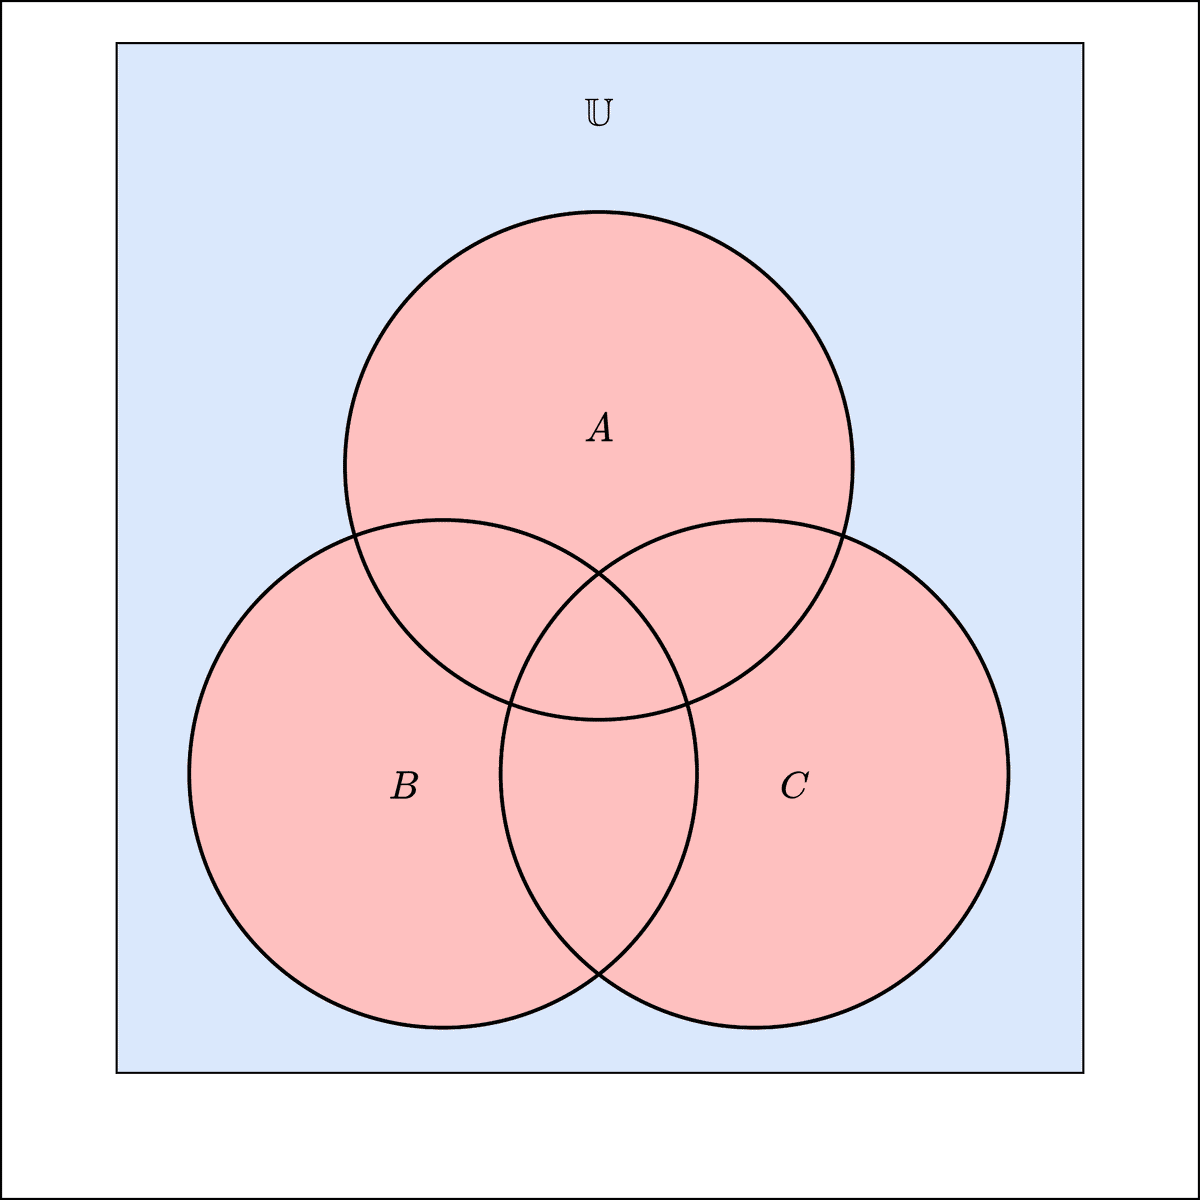 Venn diagram for the intersection of three sets